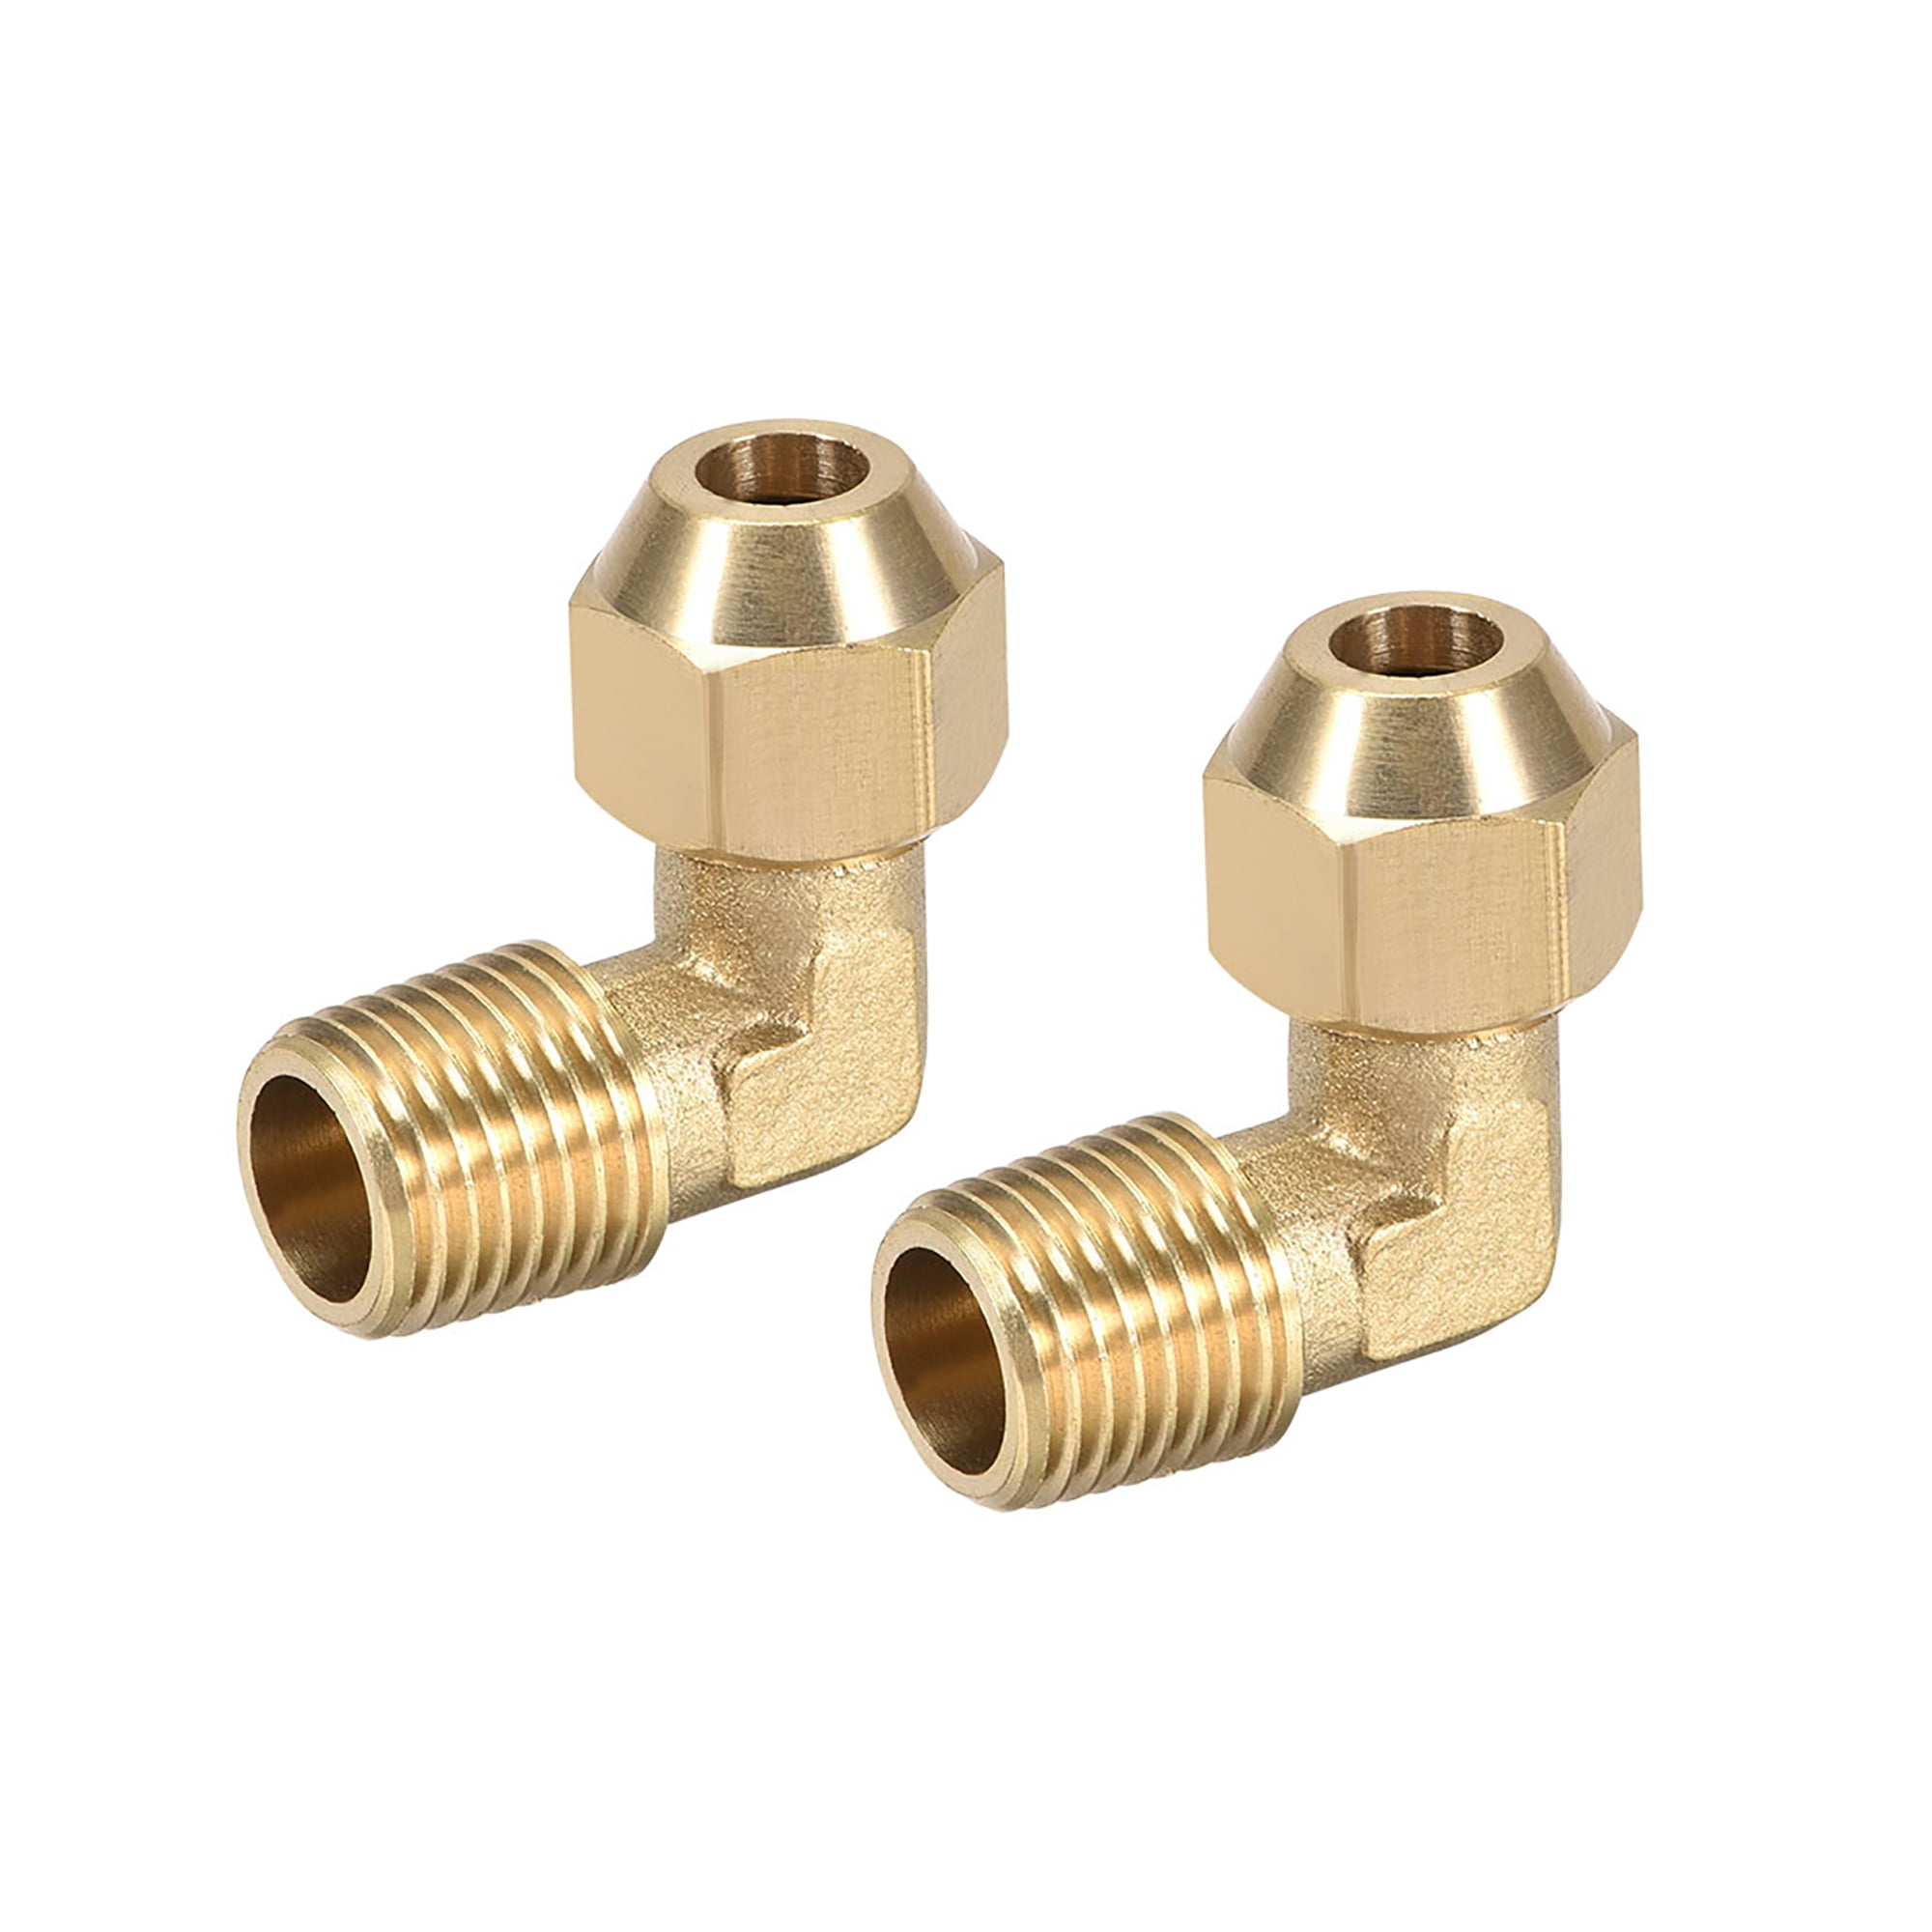 12mm BRASS COMPRESSION NUTS PACK OF 6 GAS COPPER PILOT PIPE TUBE TUBING FITTINGS 